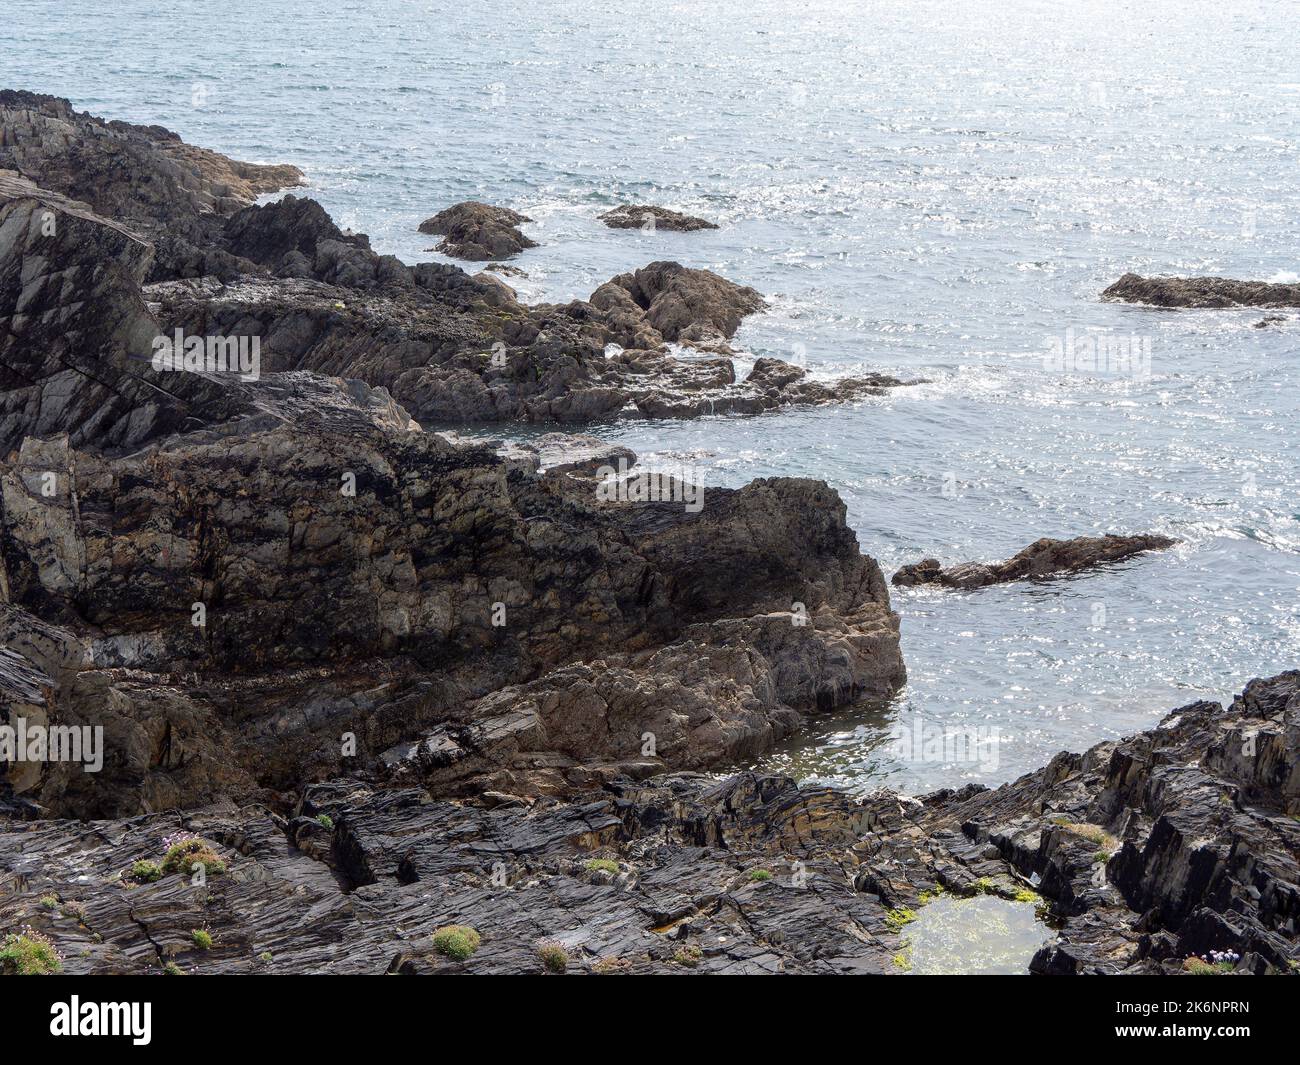 Exposed rocks on the shore. Seaside rocks in sunny weather, rock formation near body of water. Stock Photo